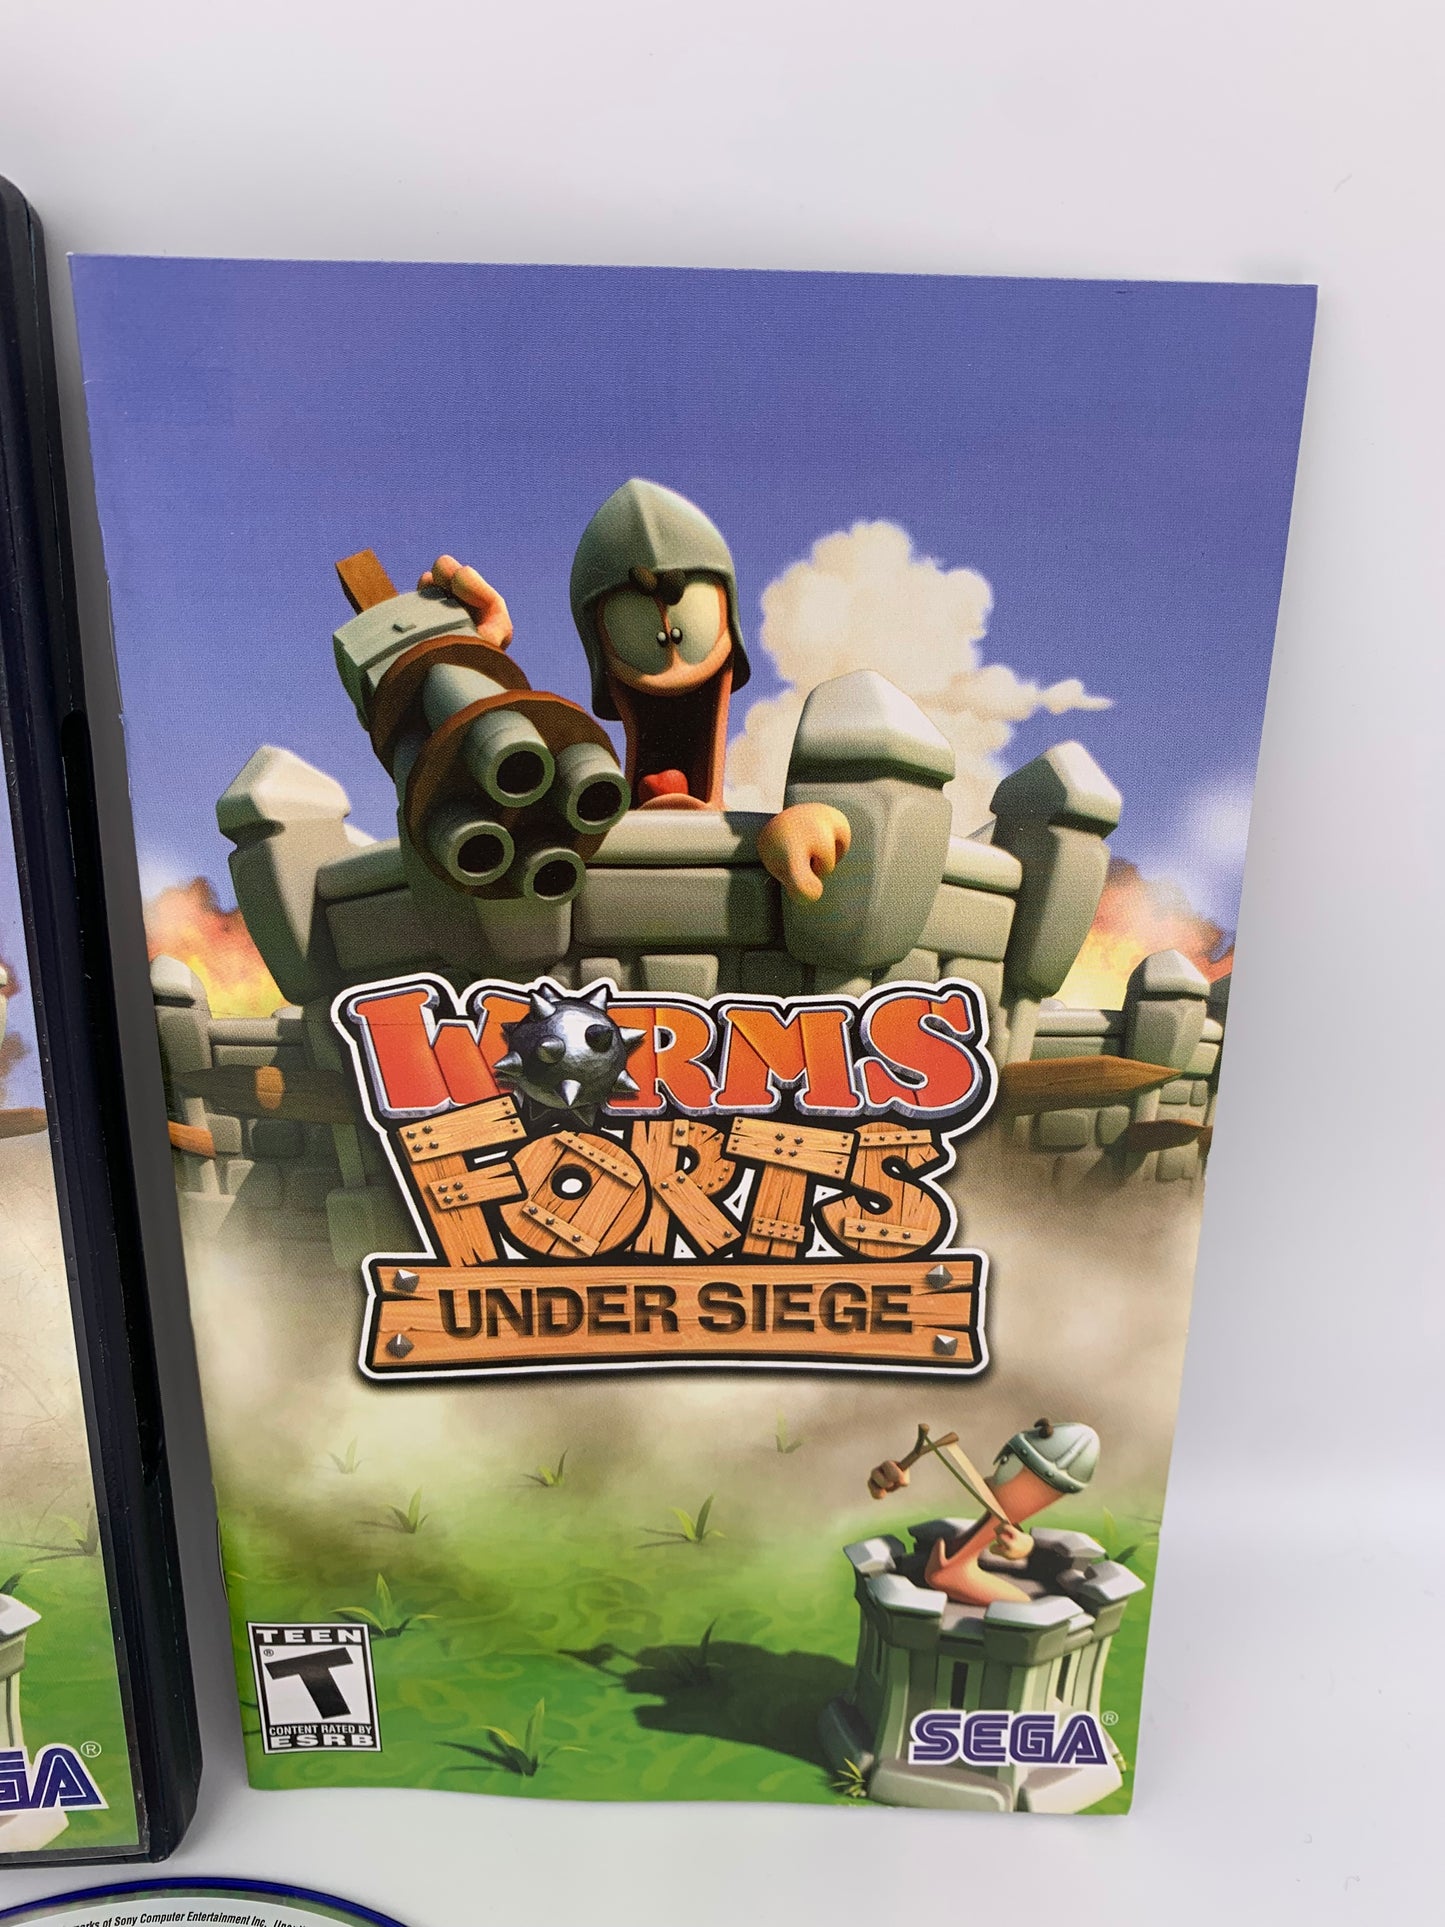 SONY PLAYSTATiON 2 [PS2] | WORMS FORTS UNDER SiEGE